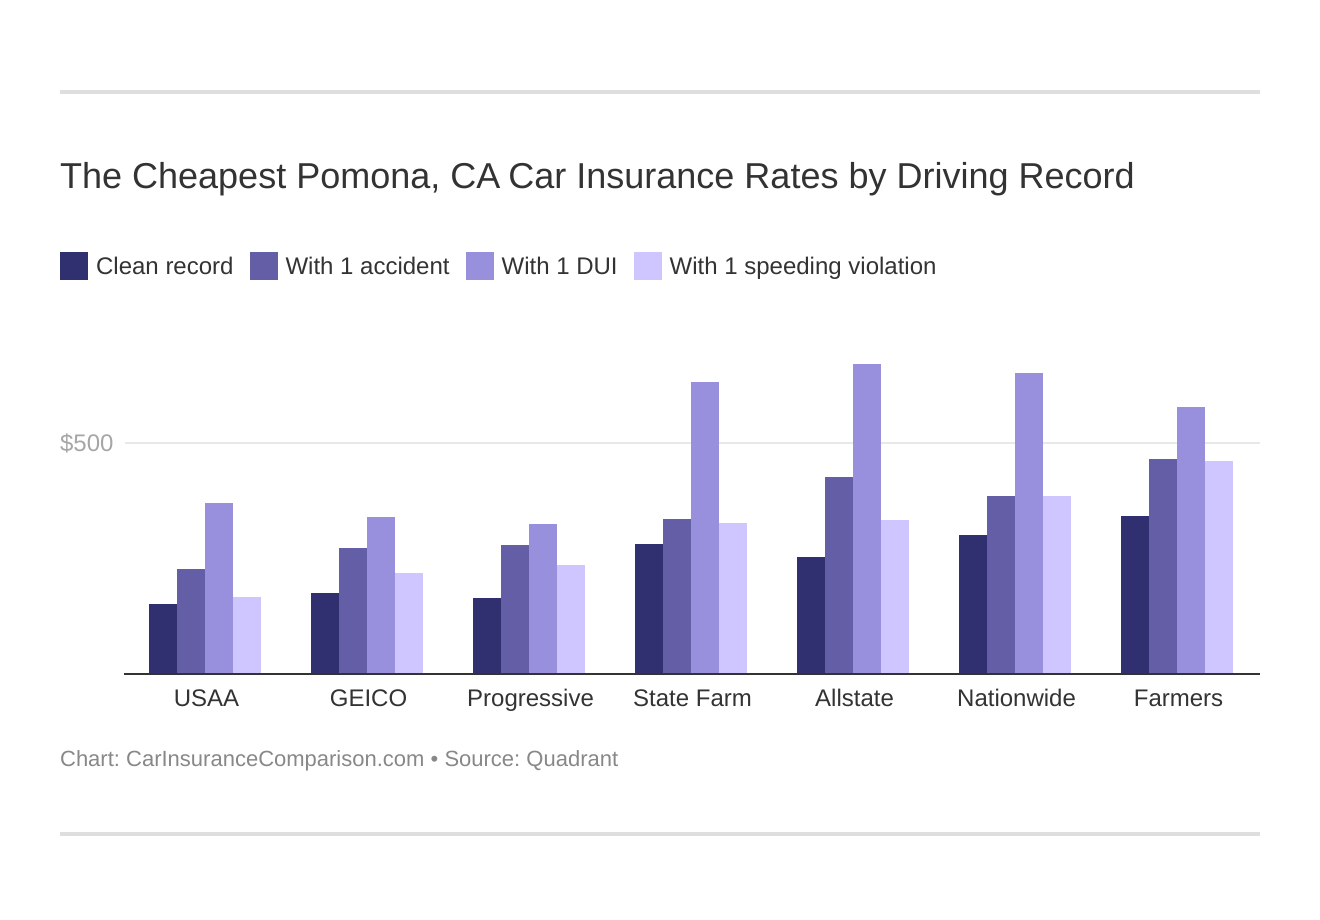 The Cheapest Pomona, CA Car Insurance Rates by Driving Record